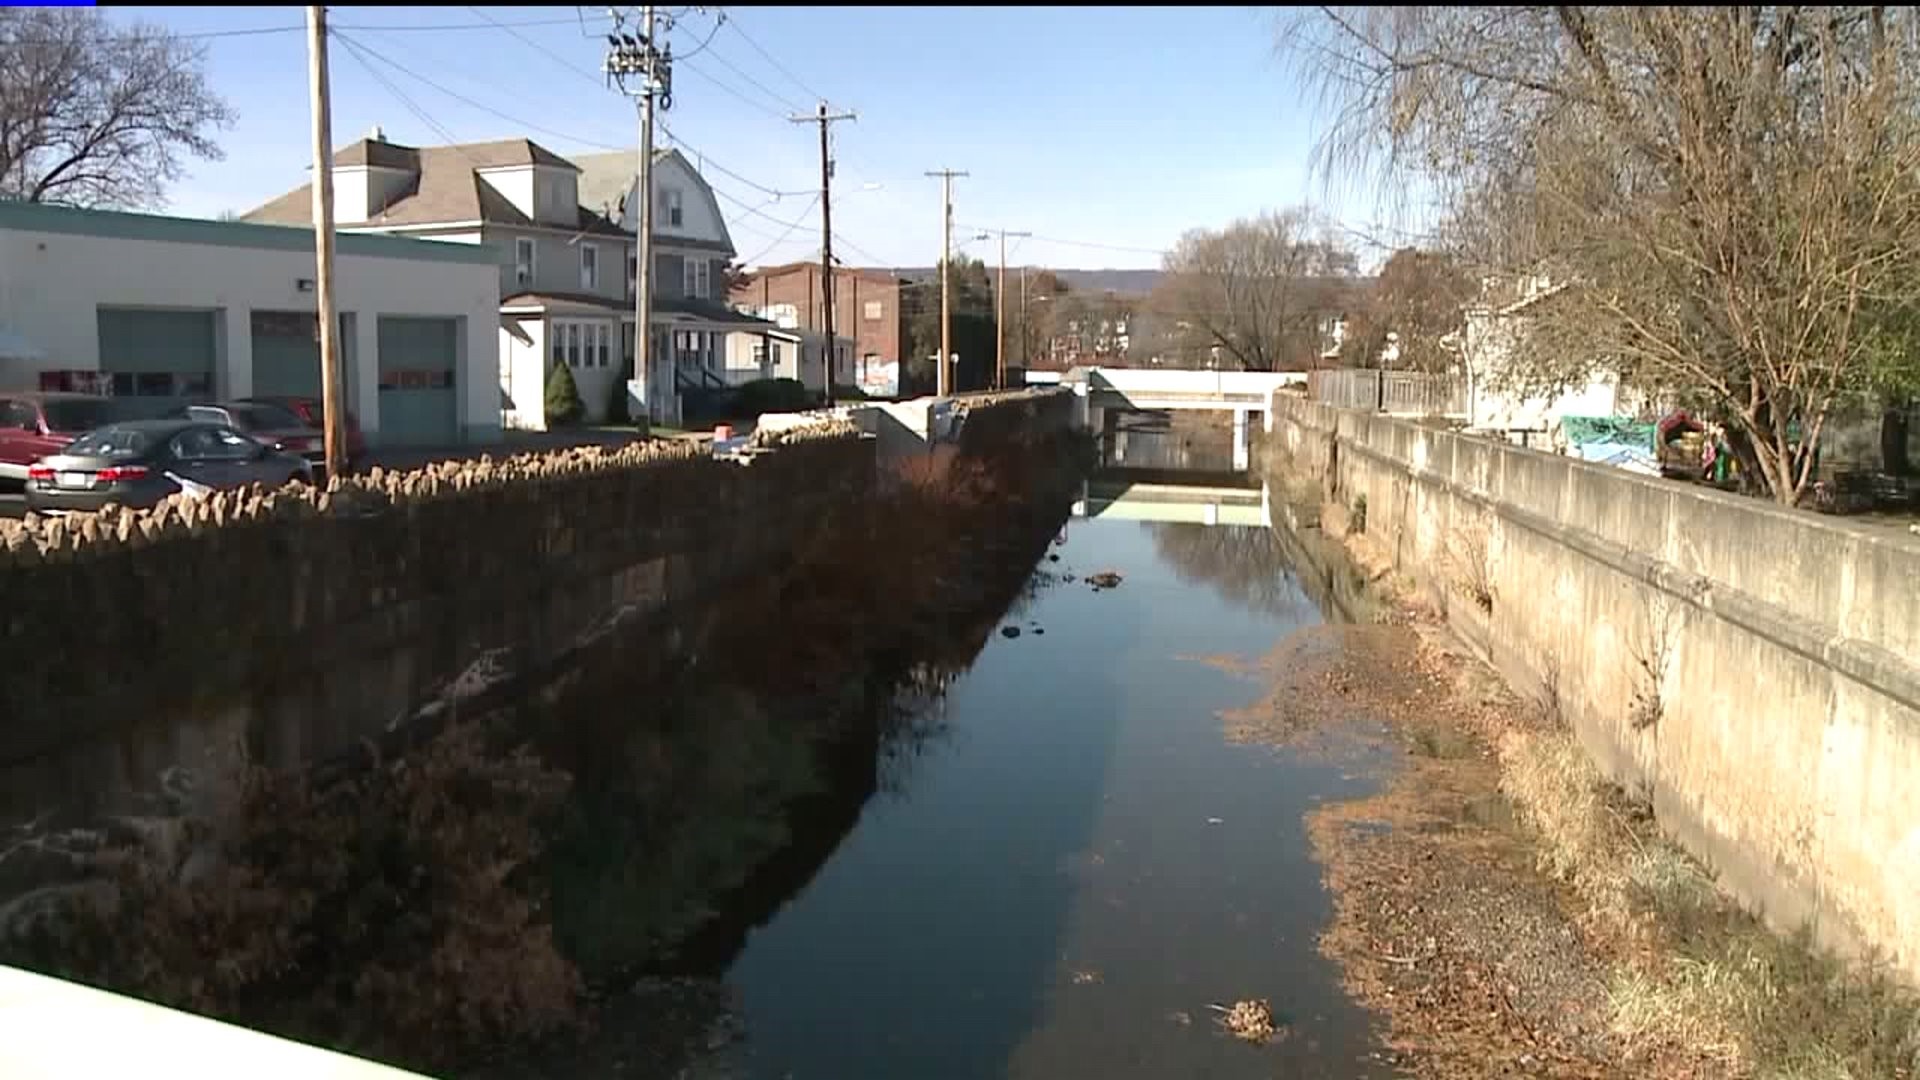 City Officials: Crumbling Flood Wall in Wilkes-Barre Will Soon Be Replaced